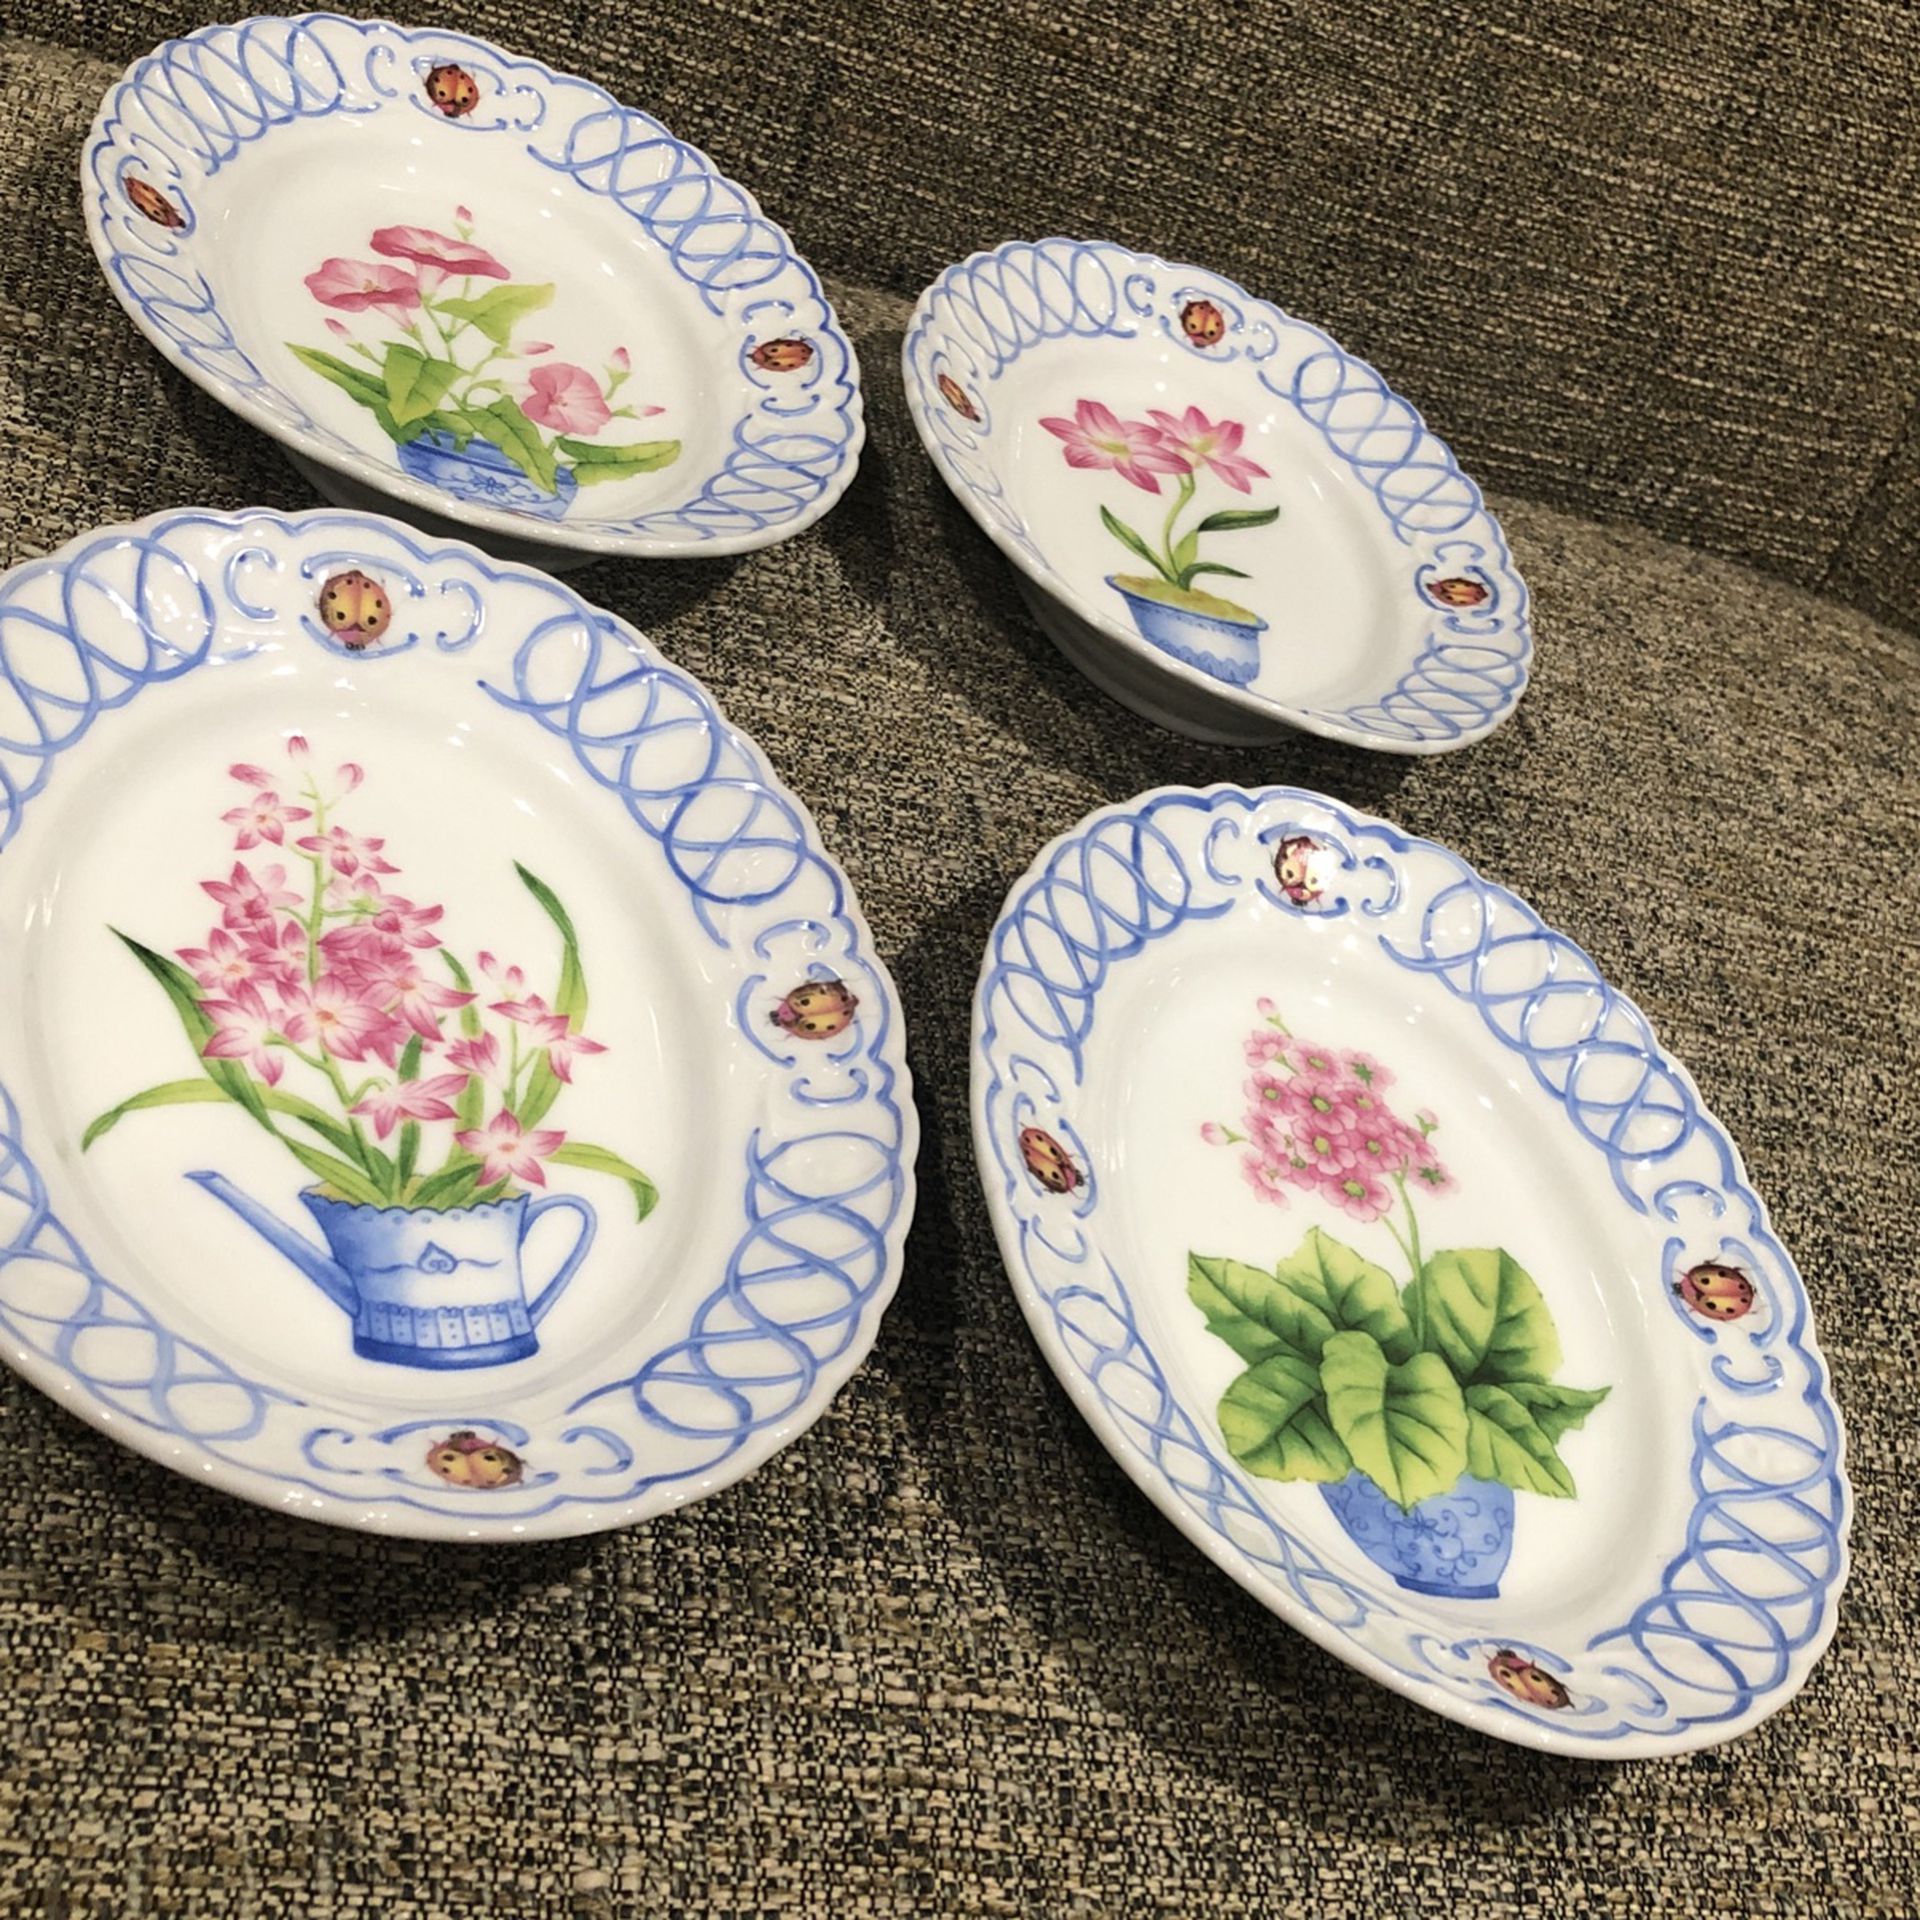 Set of 4 -Oval Porcelain Dishes of Pink Flowering Plants in Pot